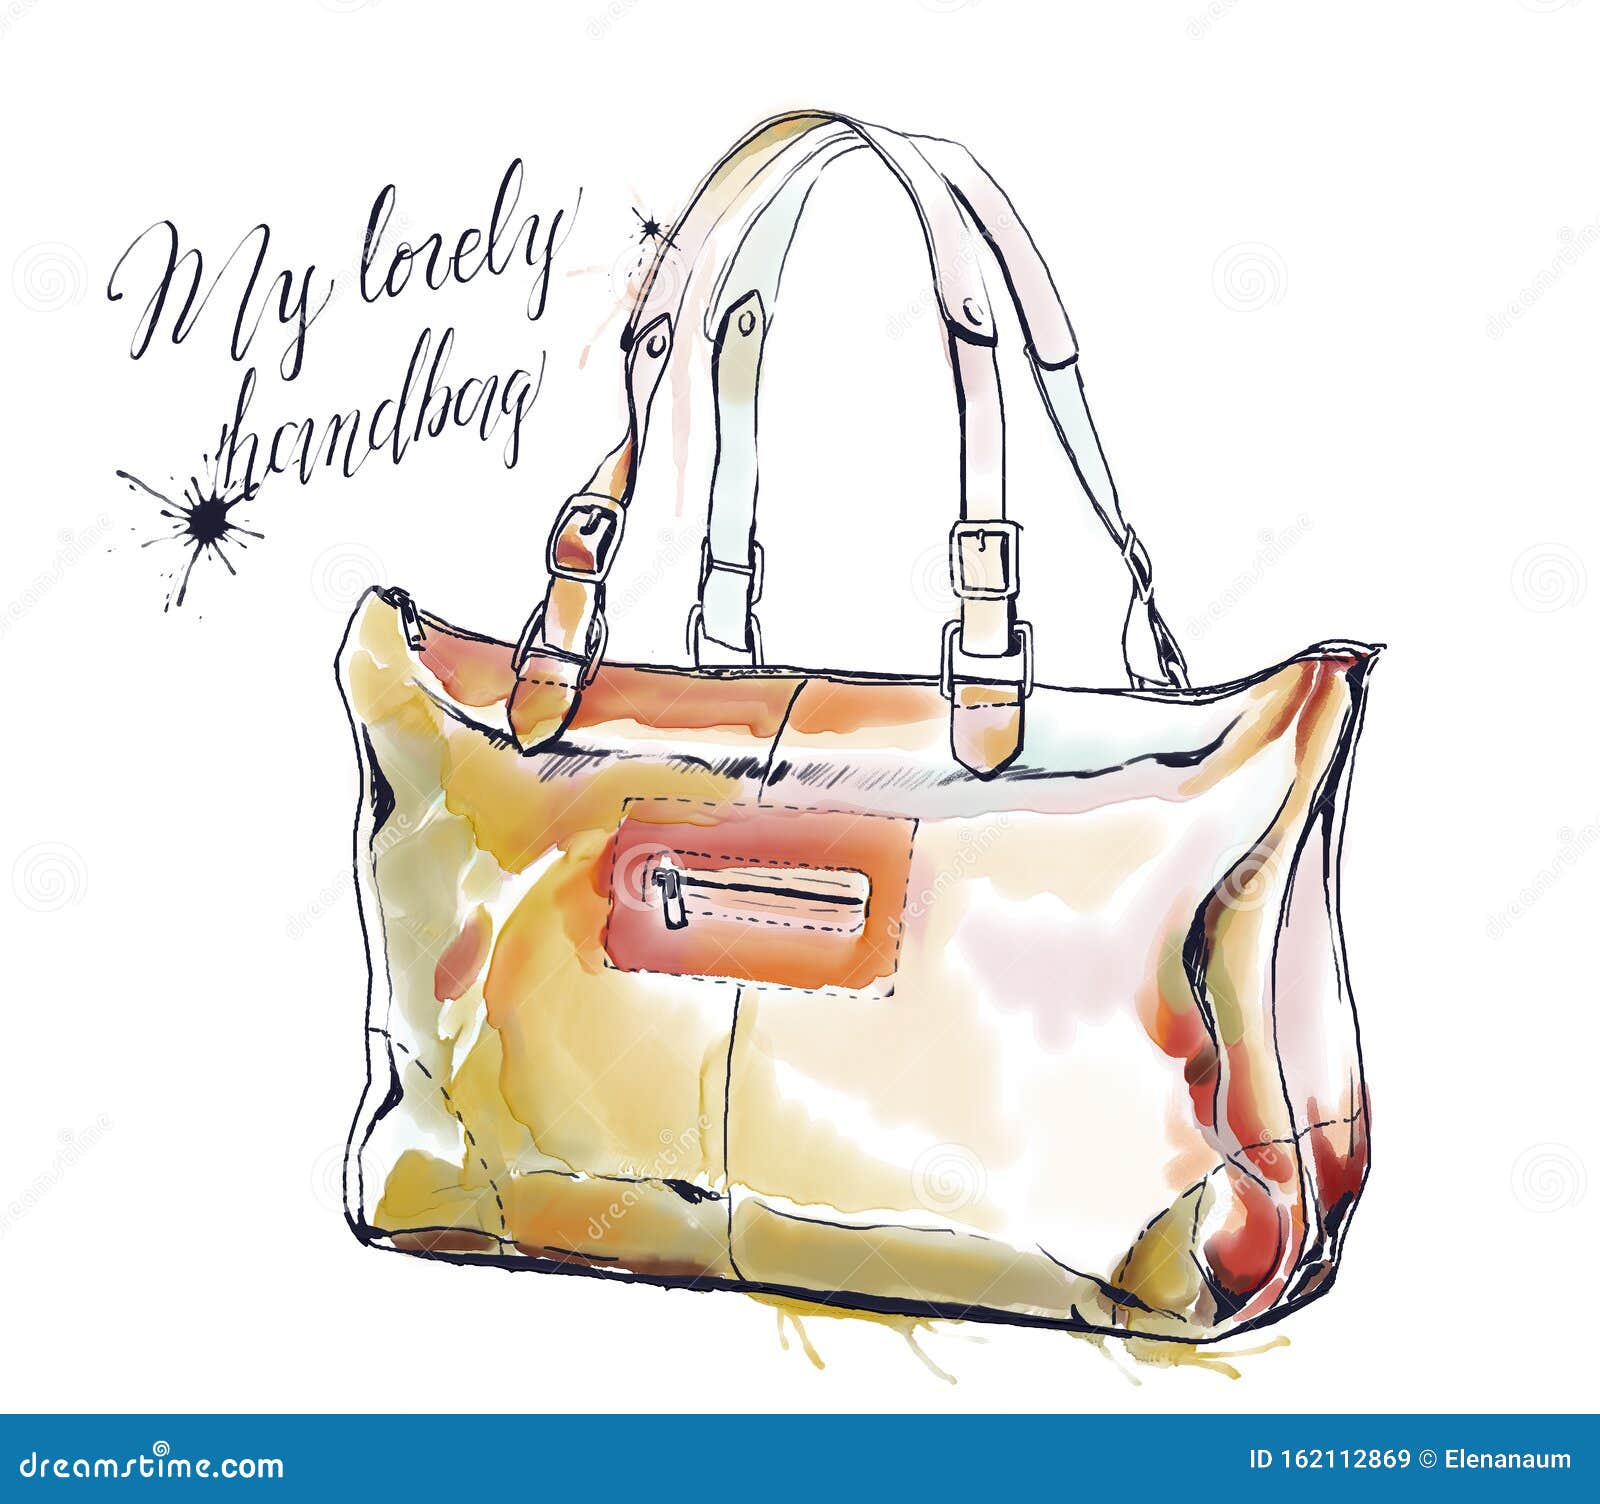 White Purse: Over 79,216 Royalty-Free Licensable Stock Illustrations &  Drawings | Shutterstock